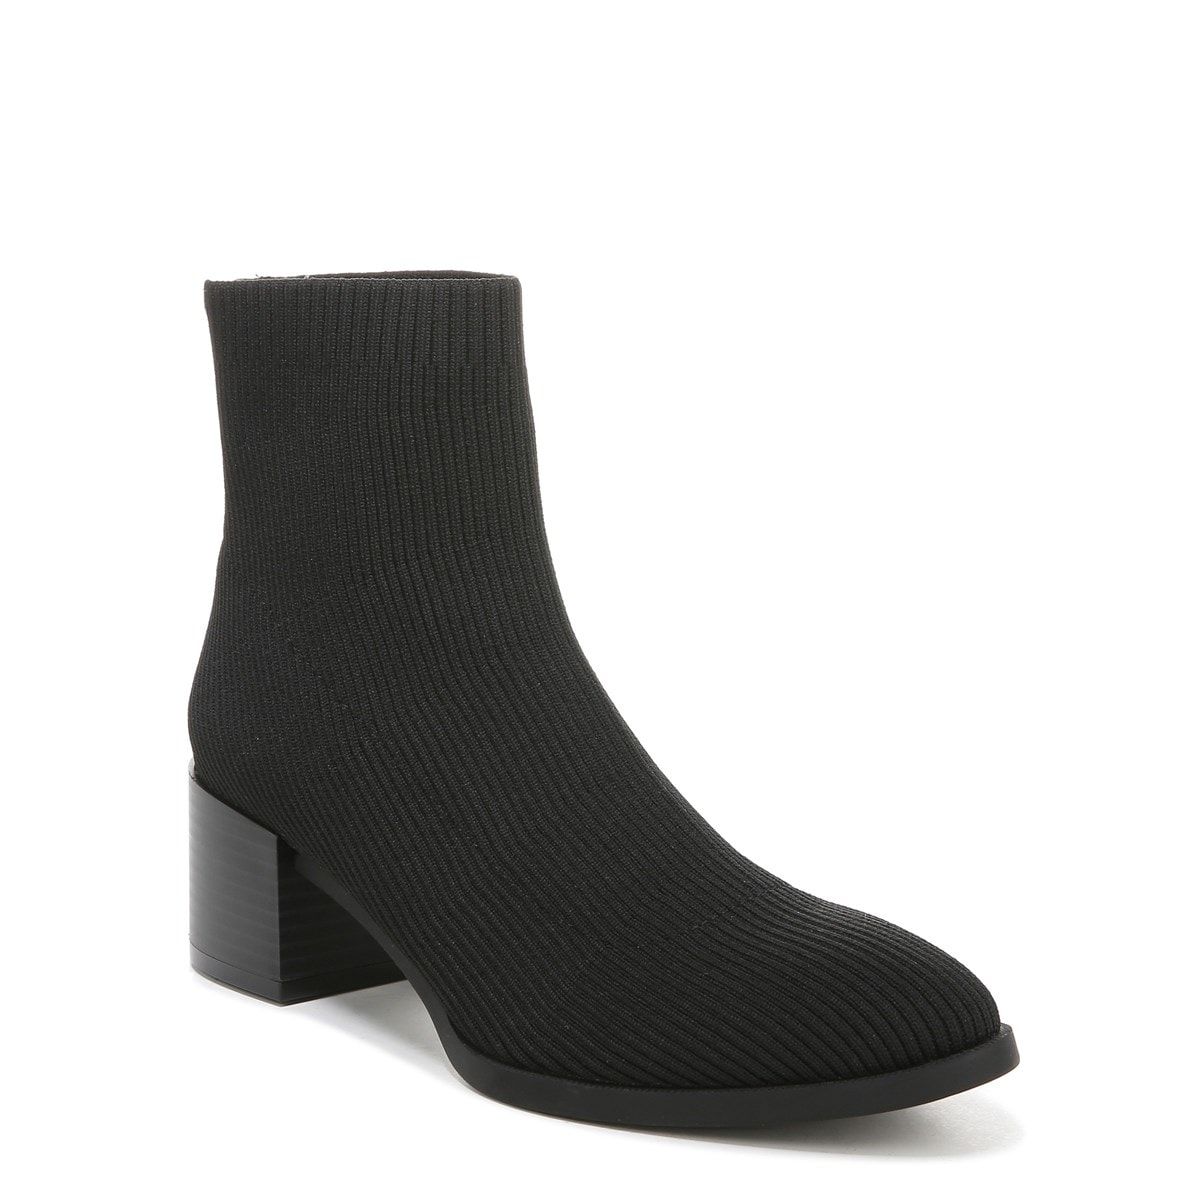 LifeStride Dreamy Ankle Bootie | Womens Boots | LIfeStride